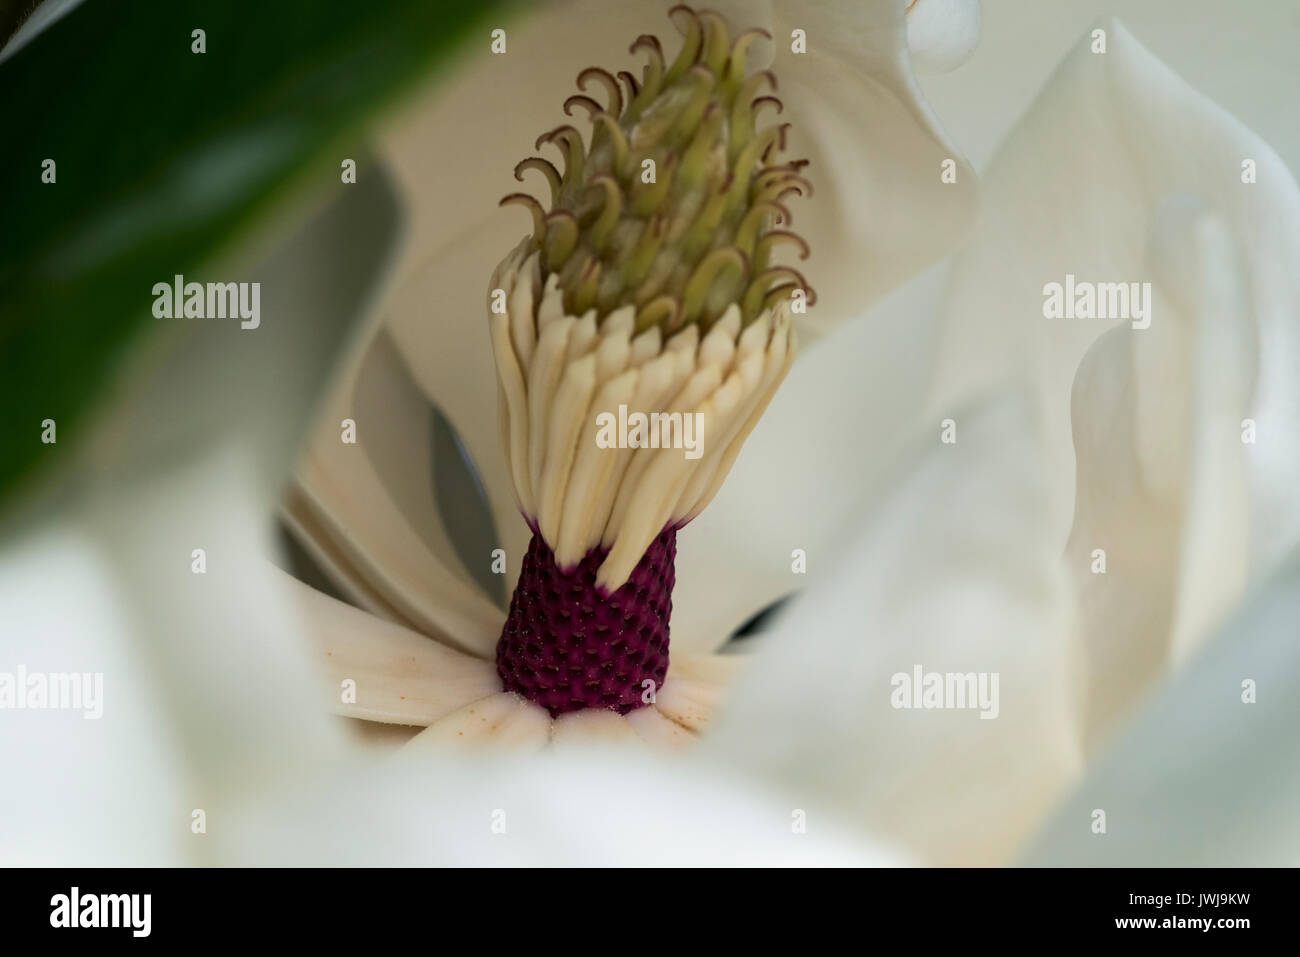 Magnolia flower fully open to reveal the stamen and stigma. Stock Photo